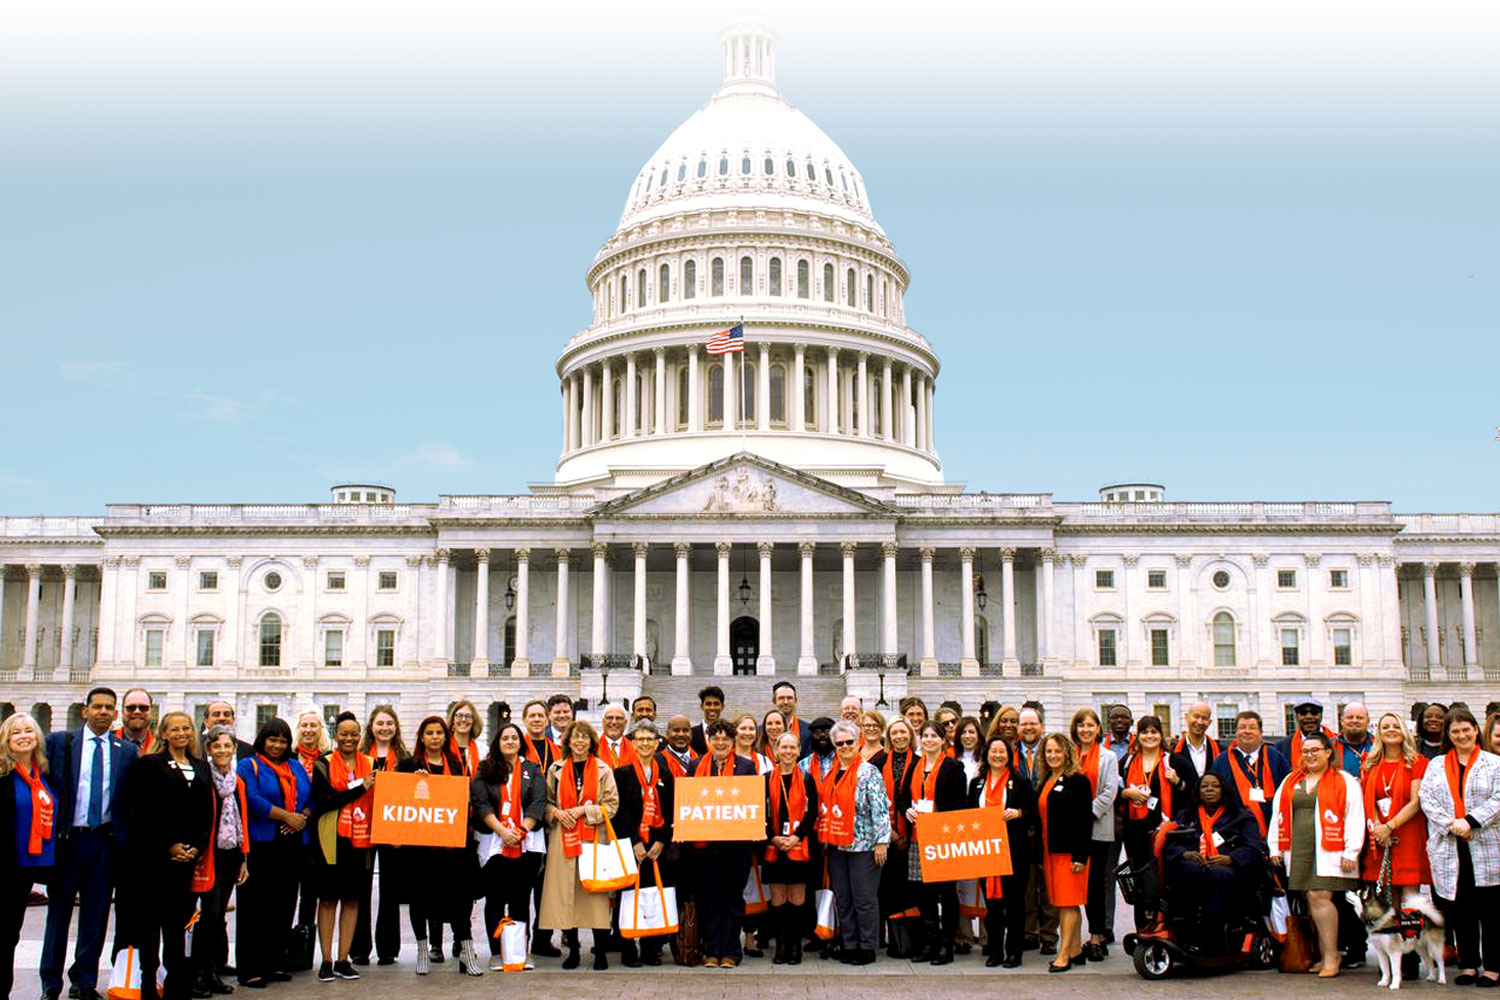 A group of Kidney Patient Summit advocates outside of the US Capitol